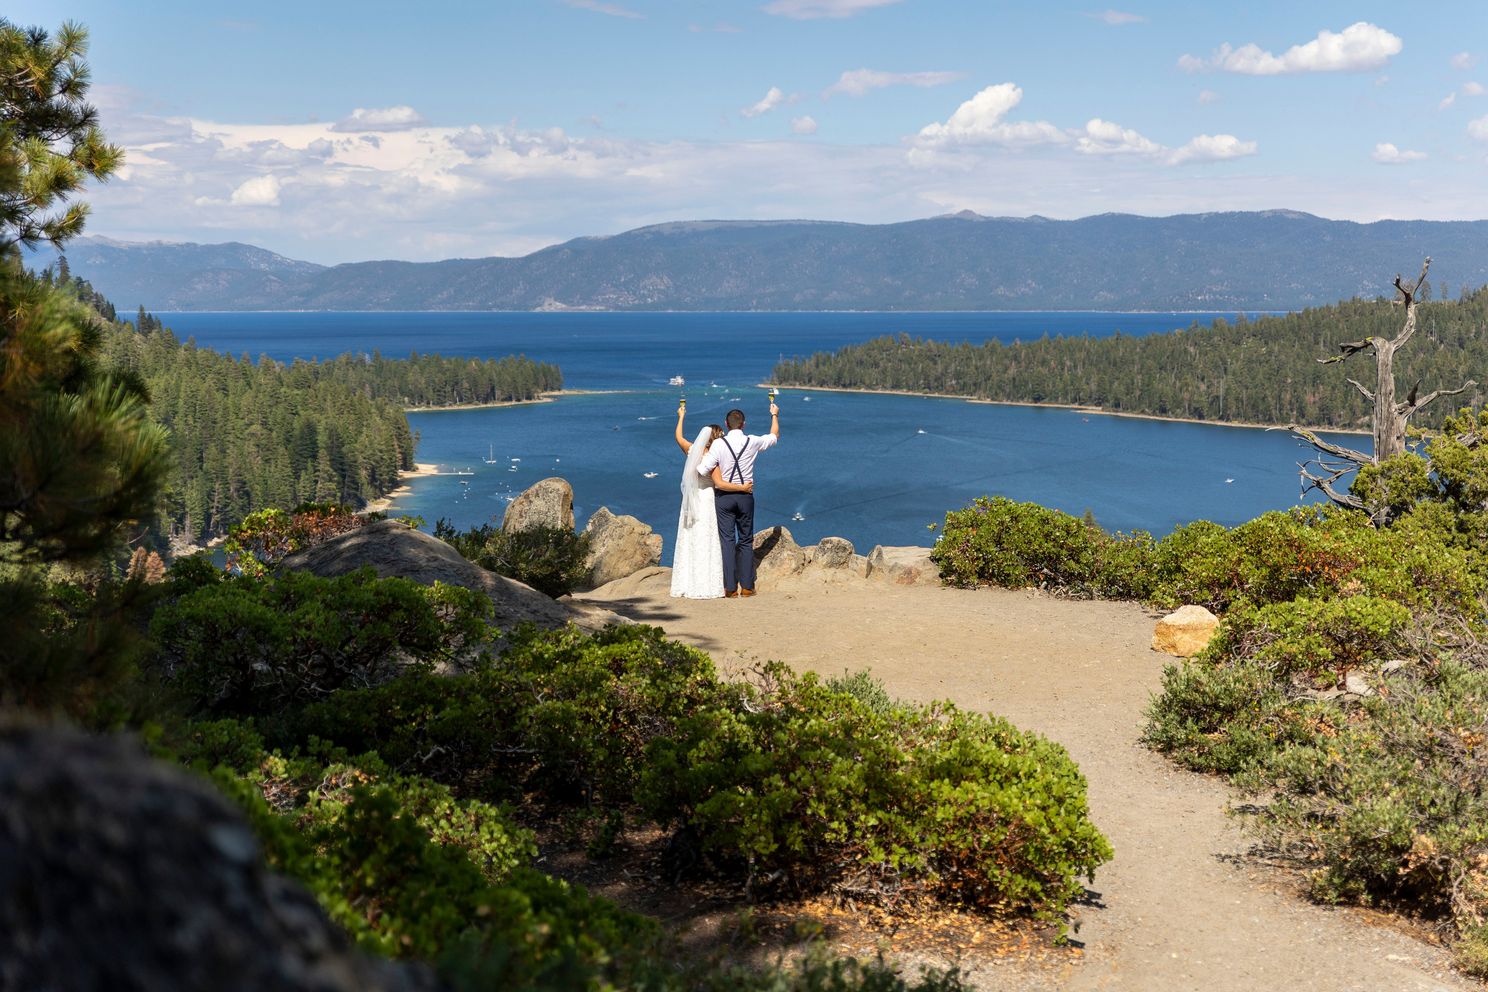 South Lake Tahoe Wedding cheering photoshoot. Emerald Bay wedding in a private location.